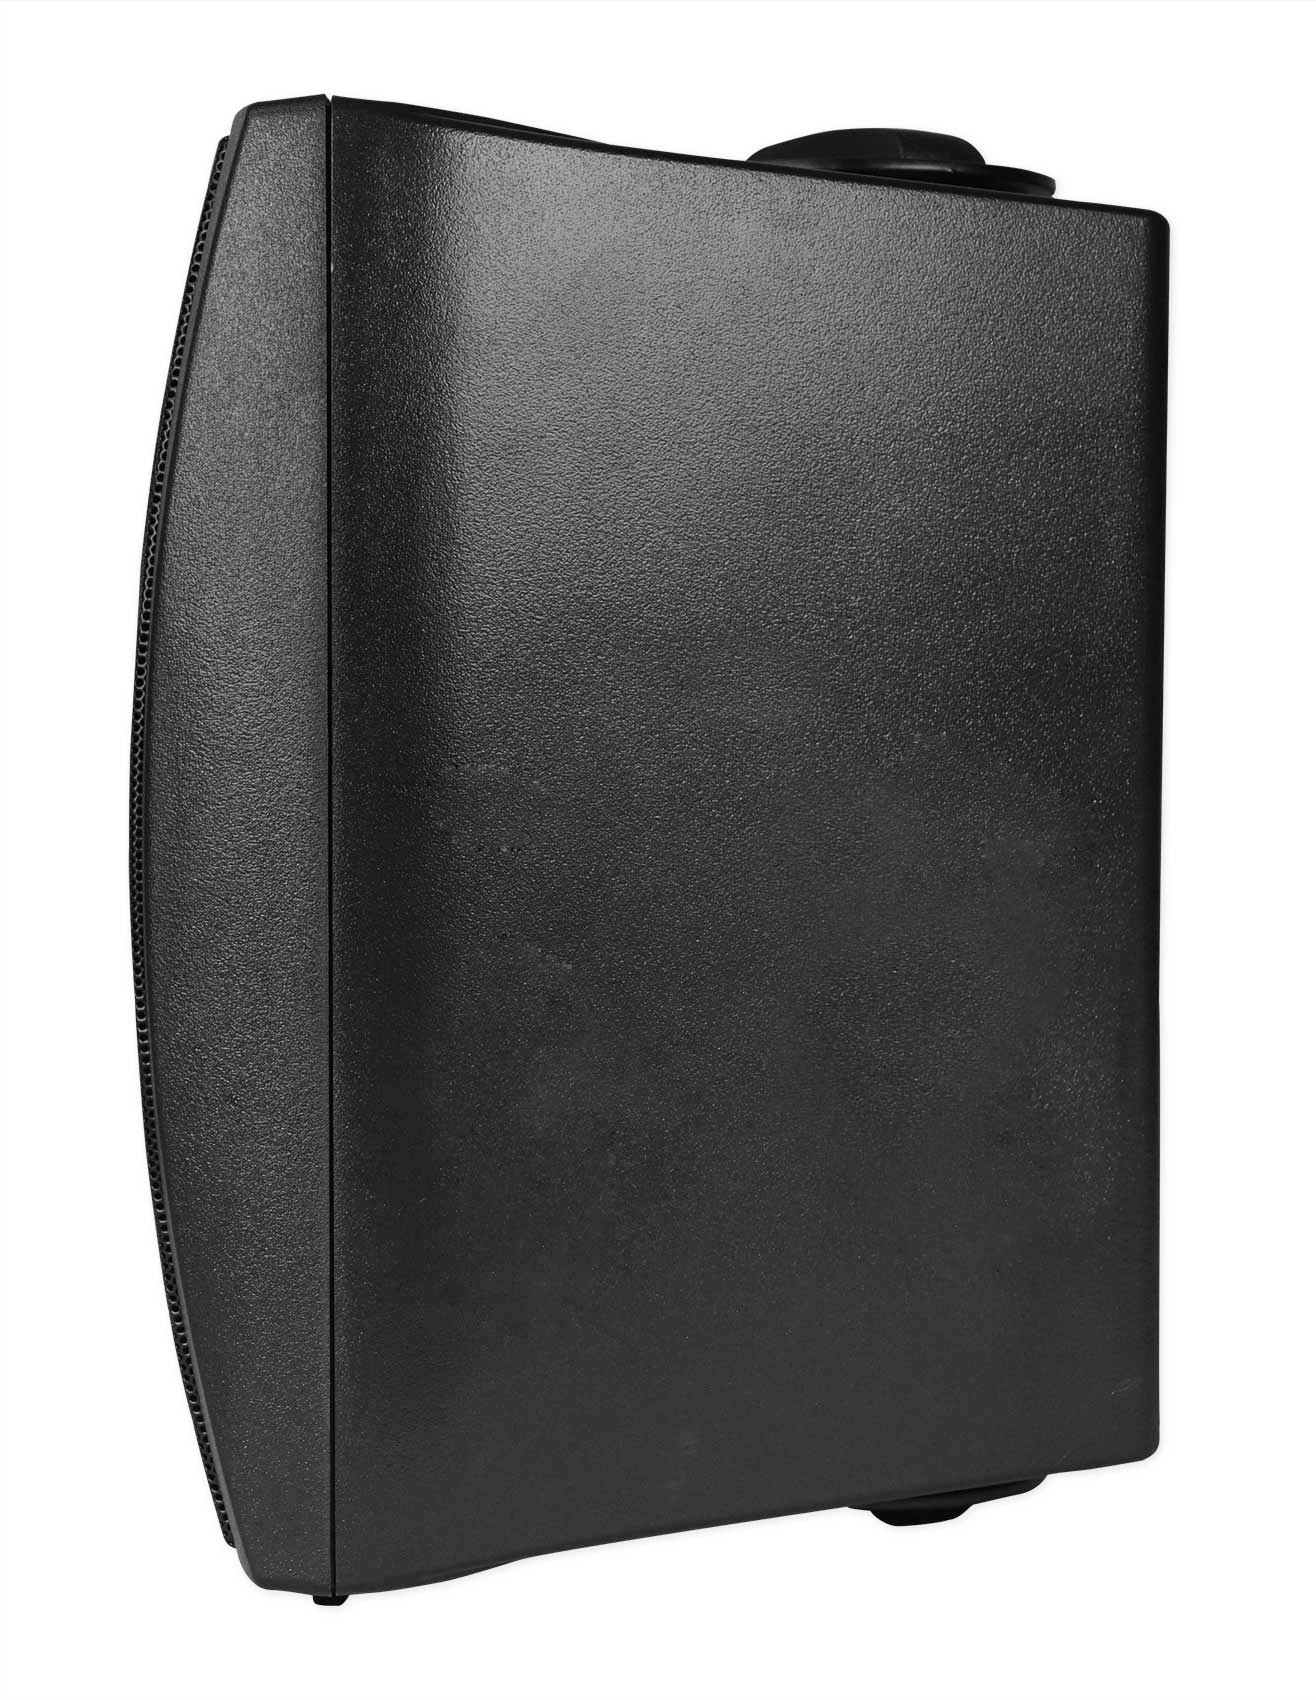 JBL VMA1120 Commercial 70v Bluetooth Amplifier+10 Wall Speakers For Restaurant - image 2 of 15